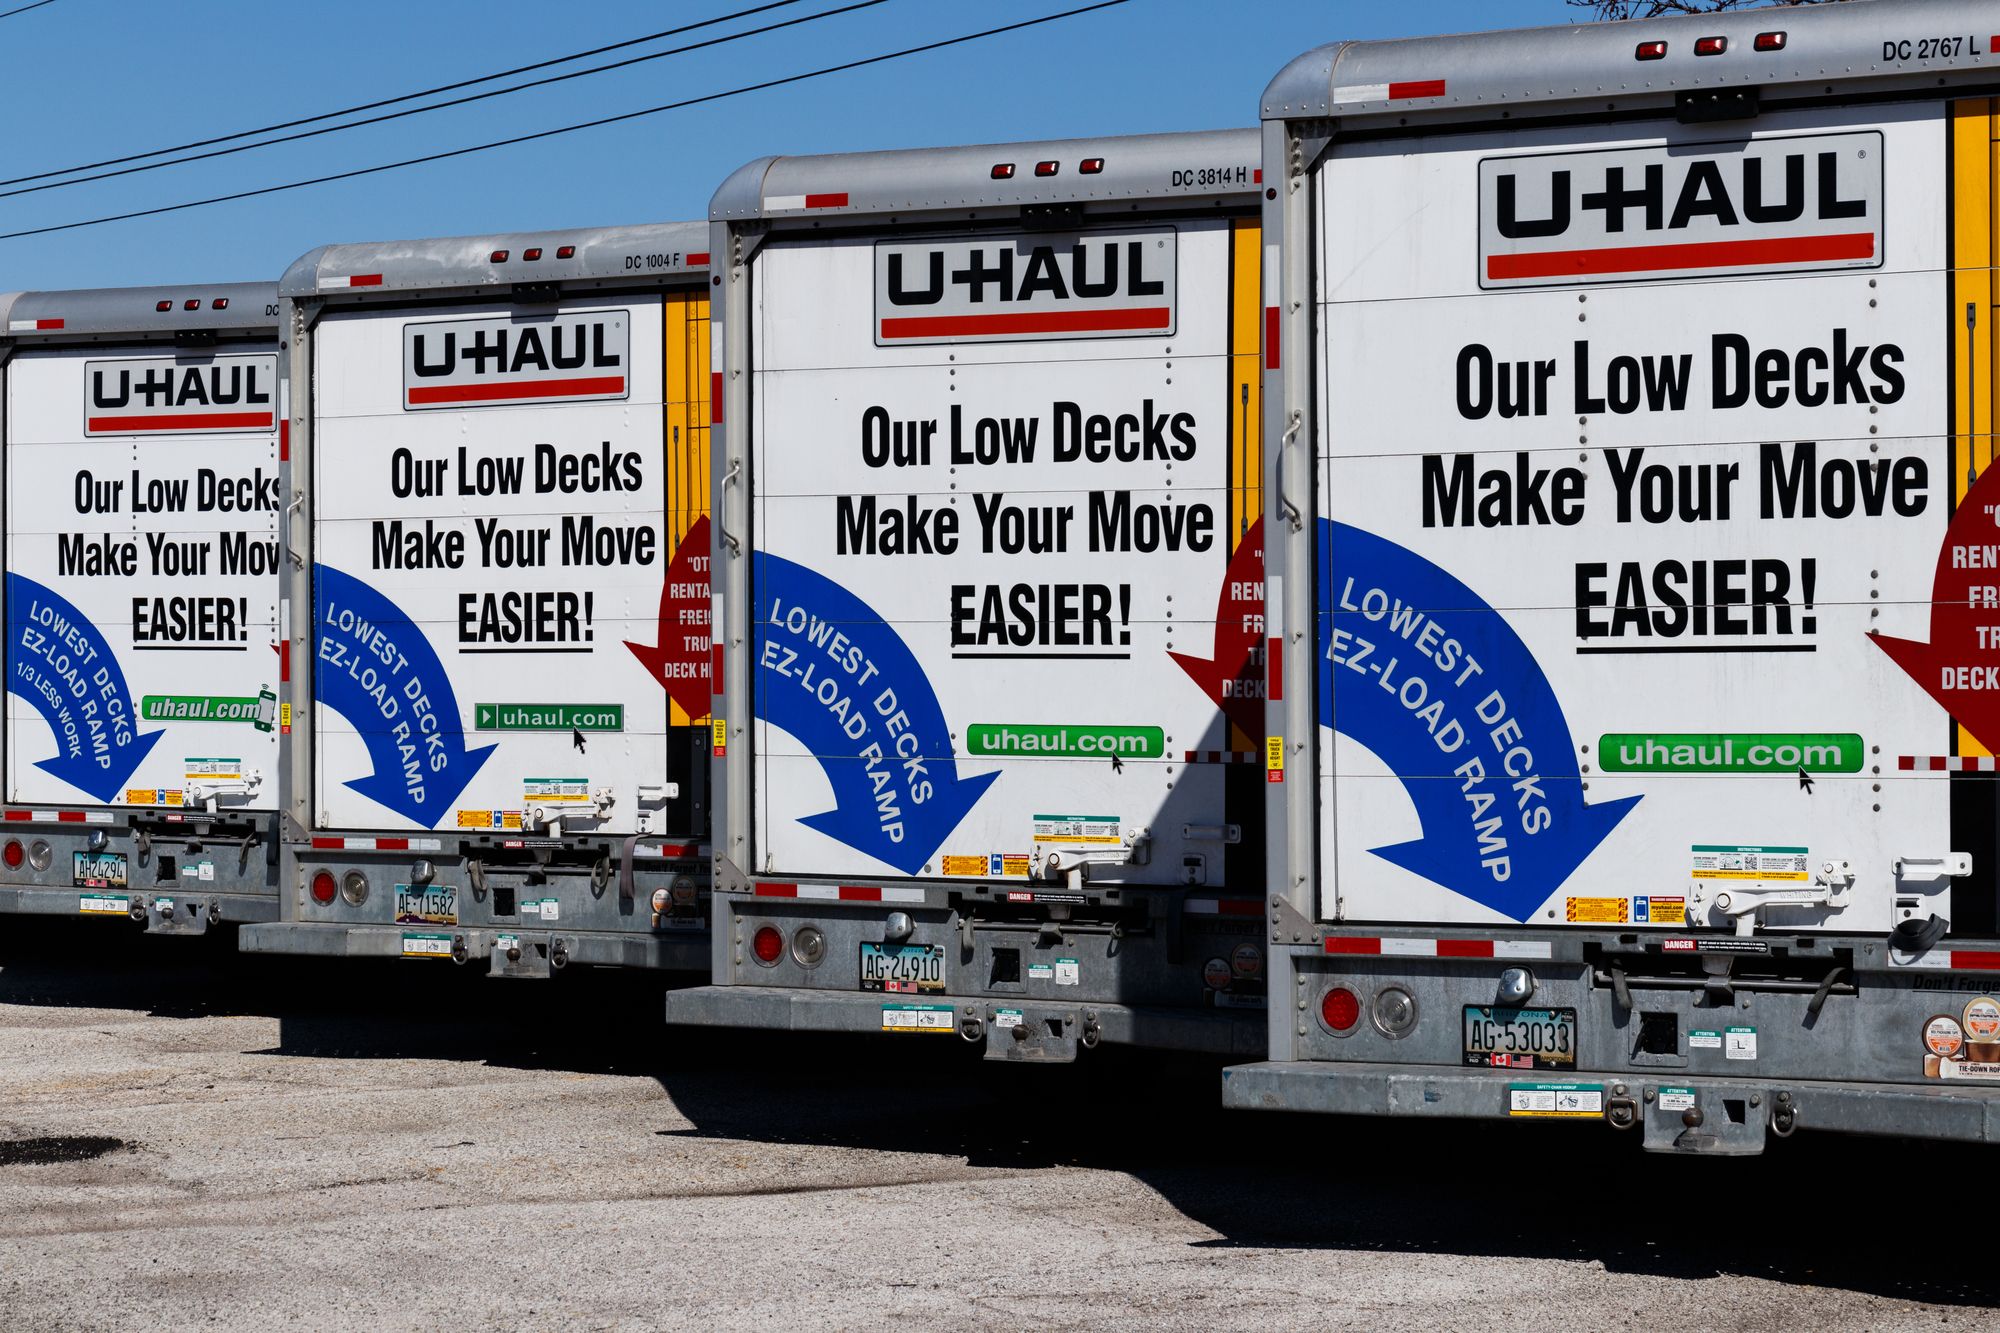 u-haul-class-action-company-doesn-t-honor-reservation-guarantee-top-class-actions